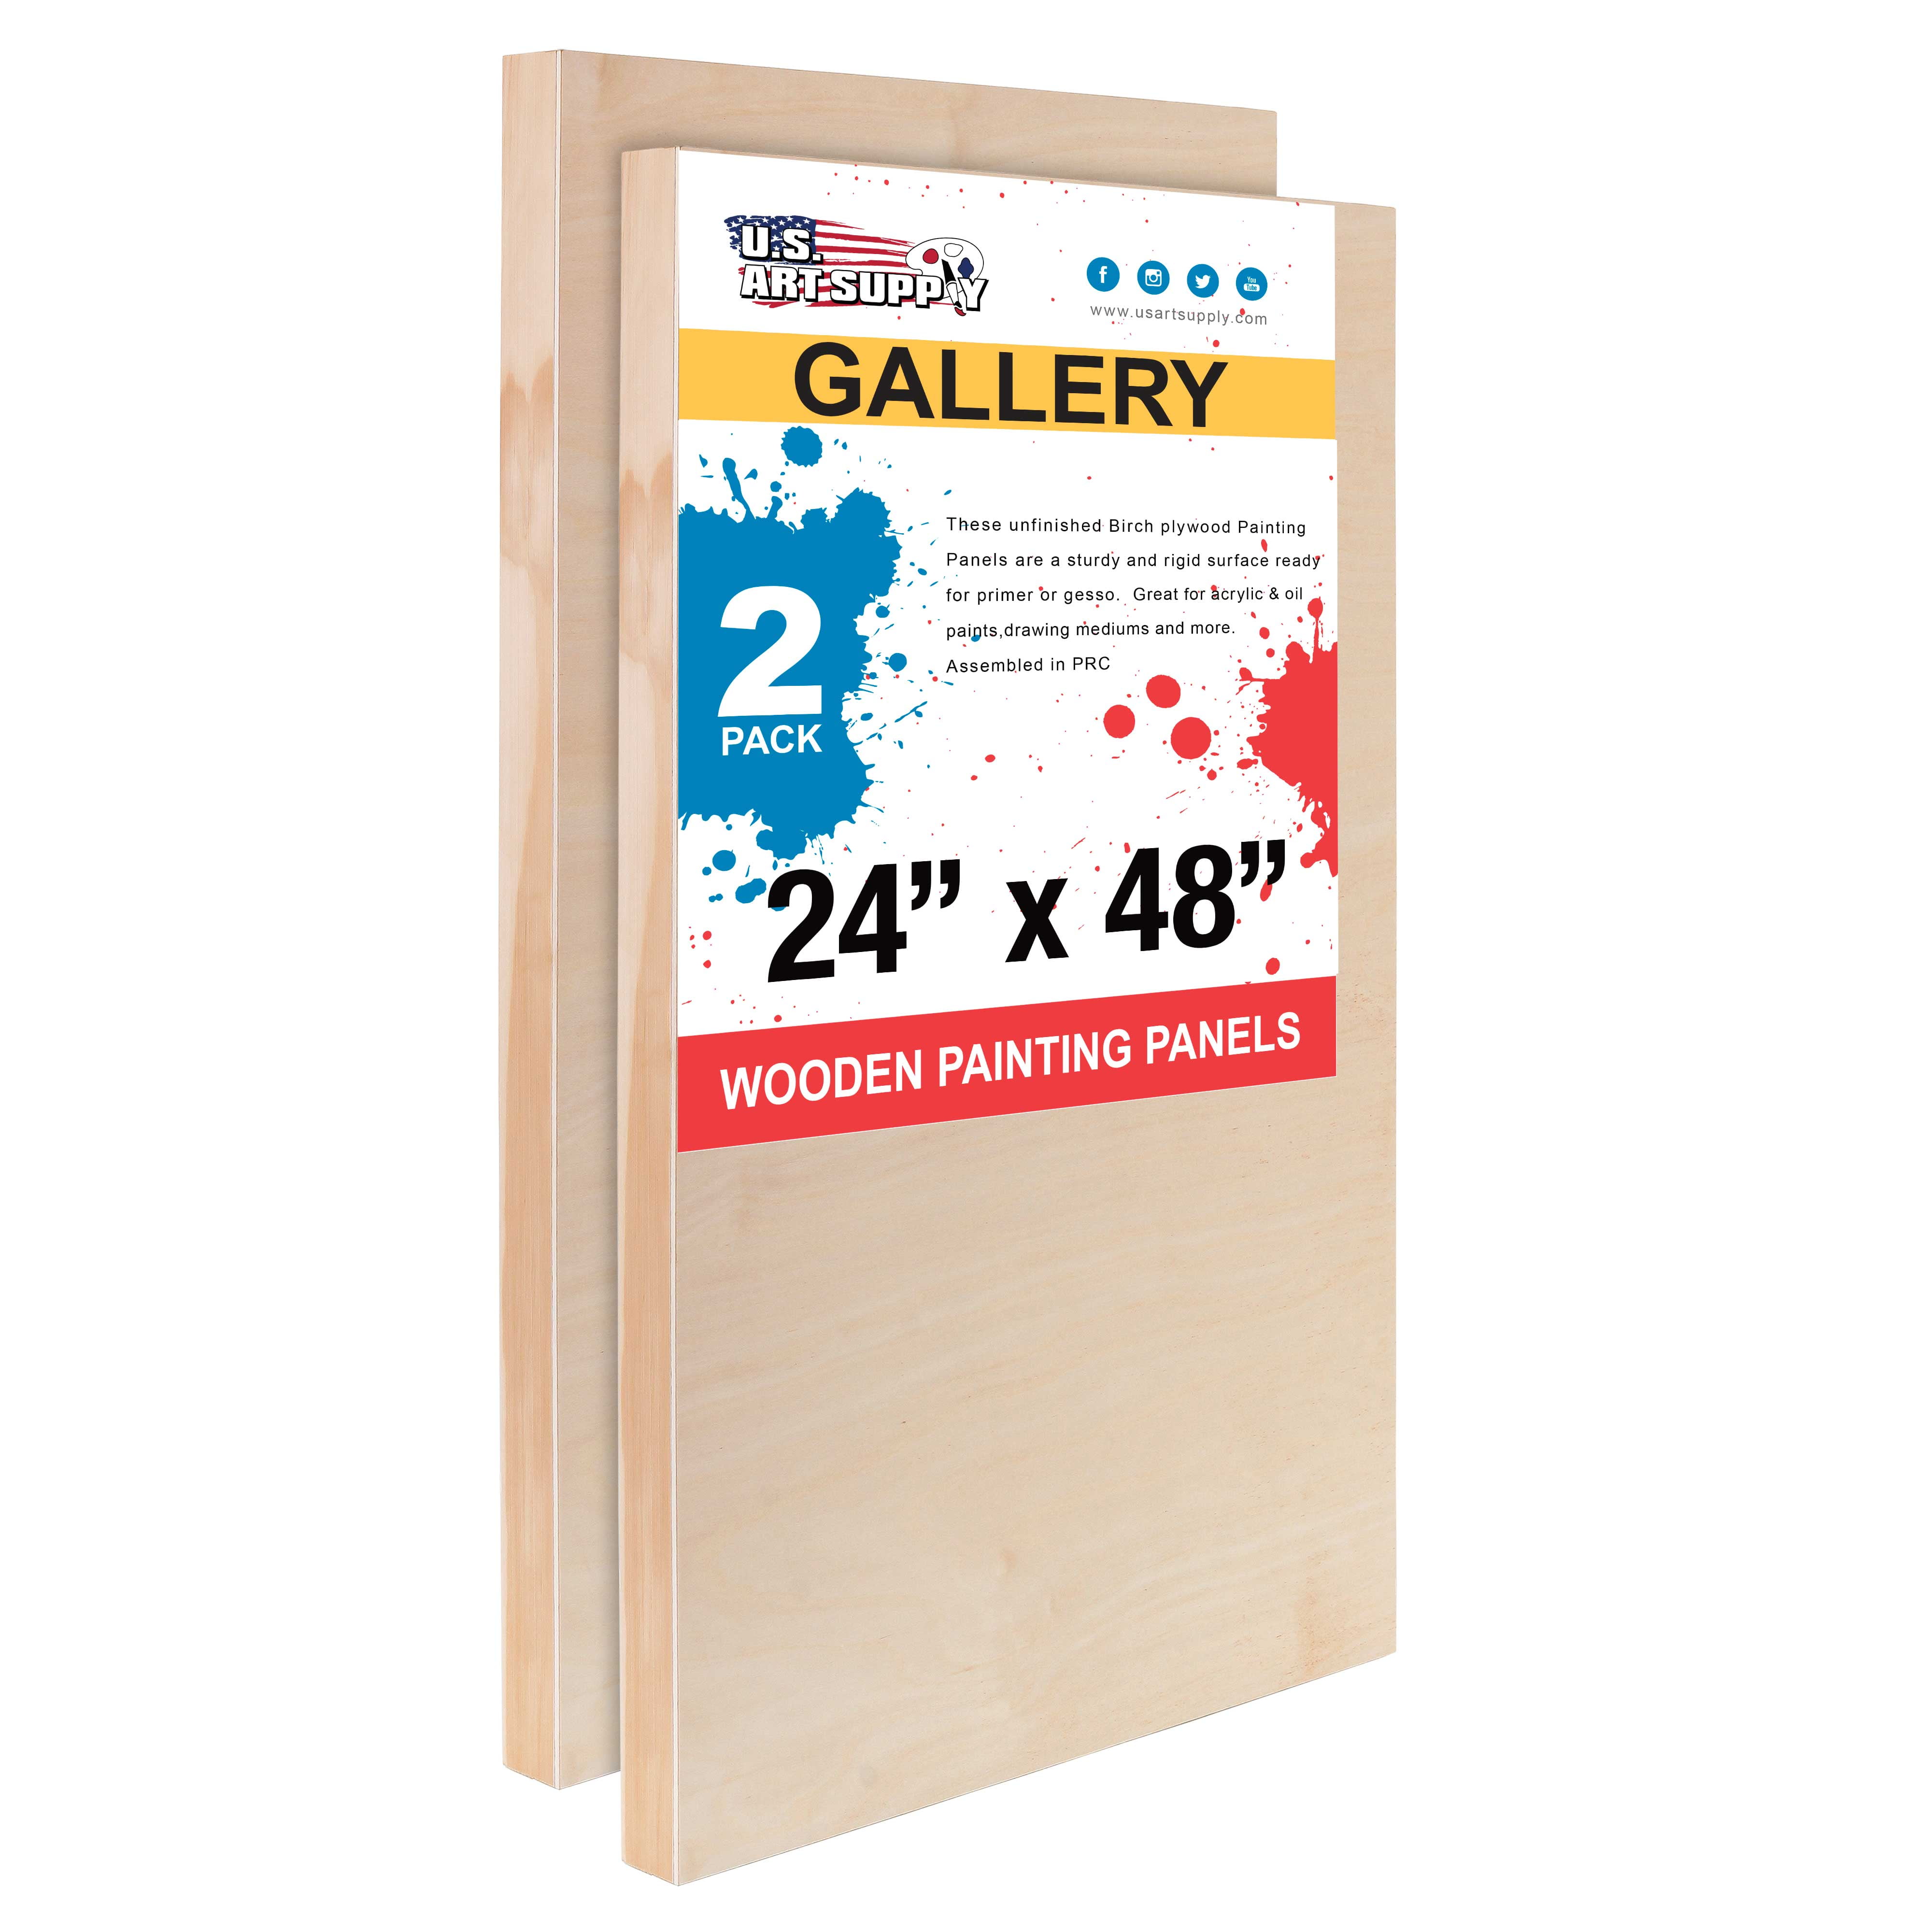 Art Boards™ Cradled Art Panel is unsurpased for quality and stability.